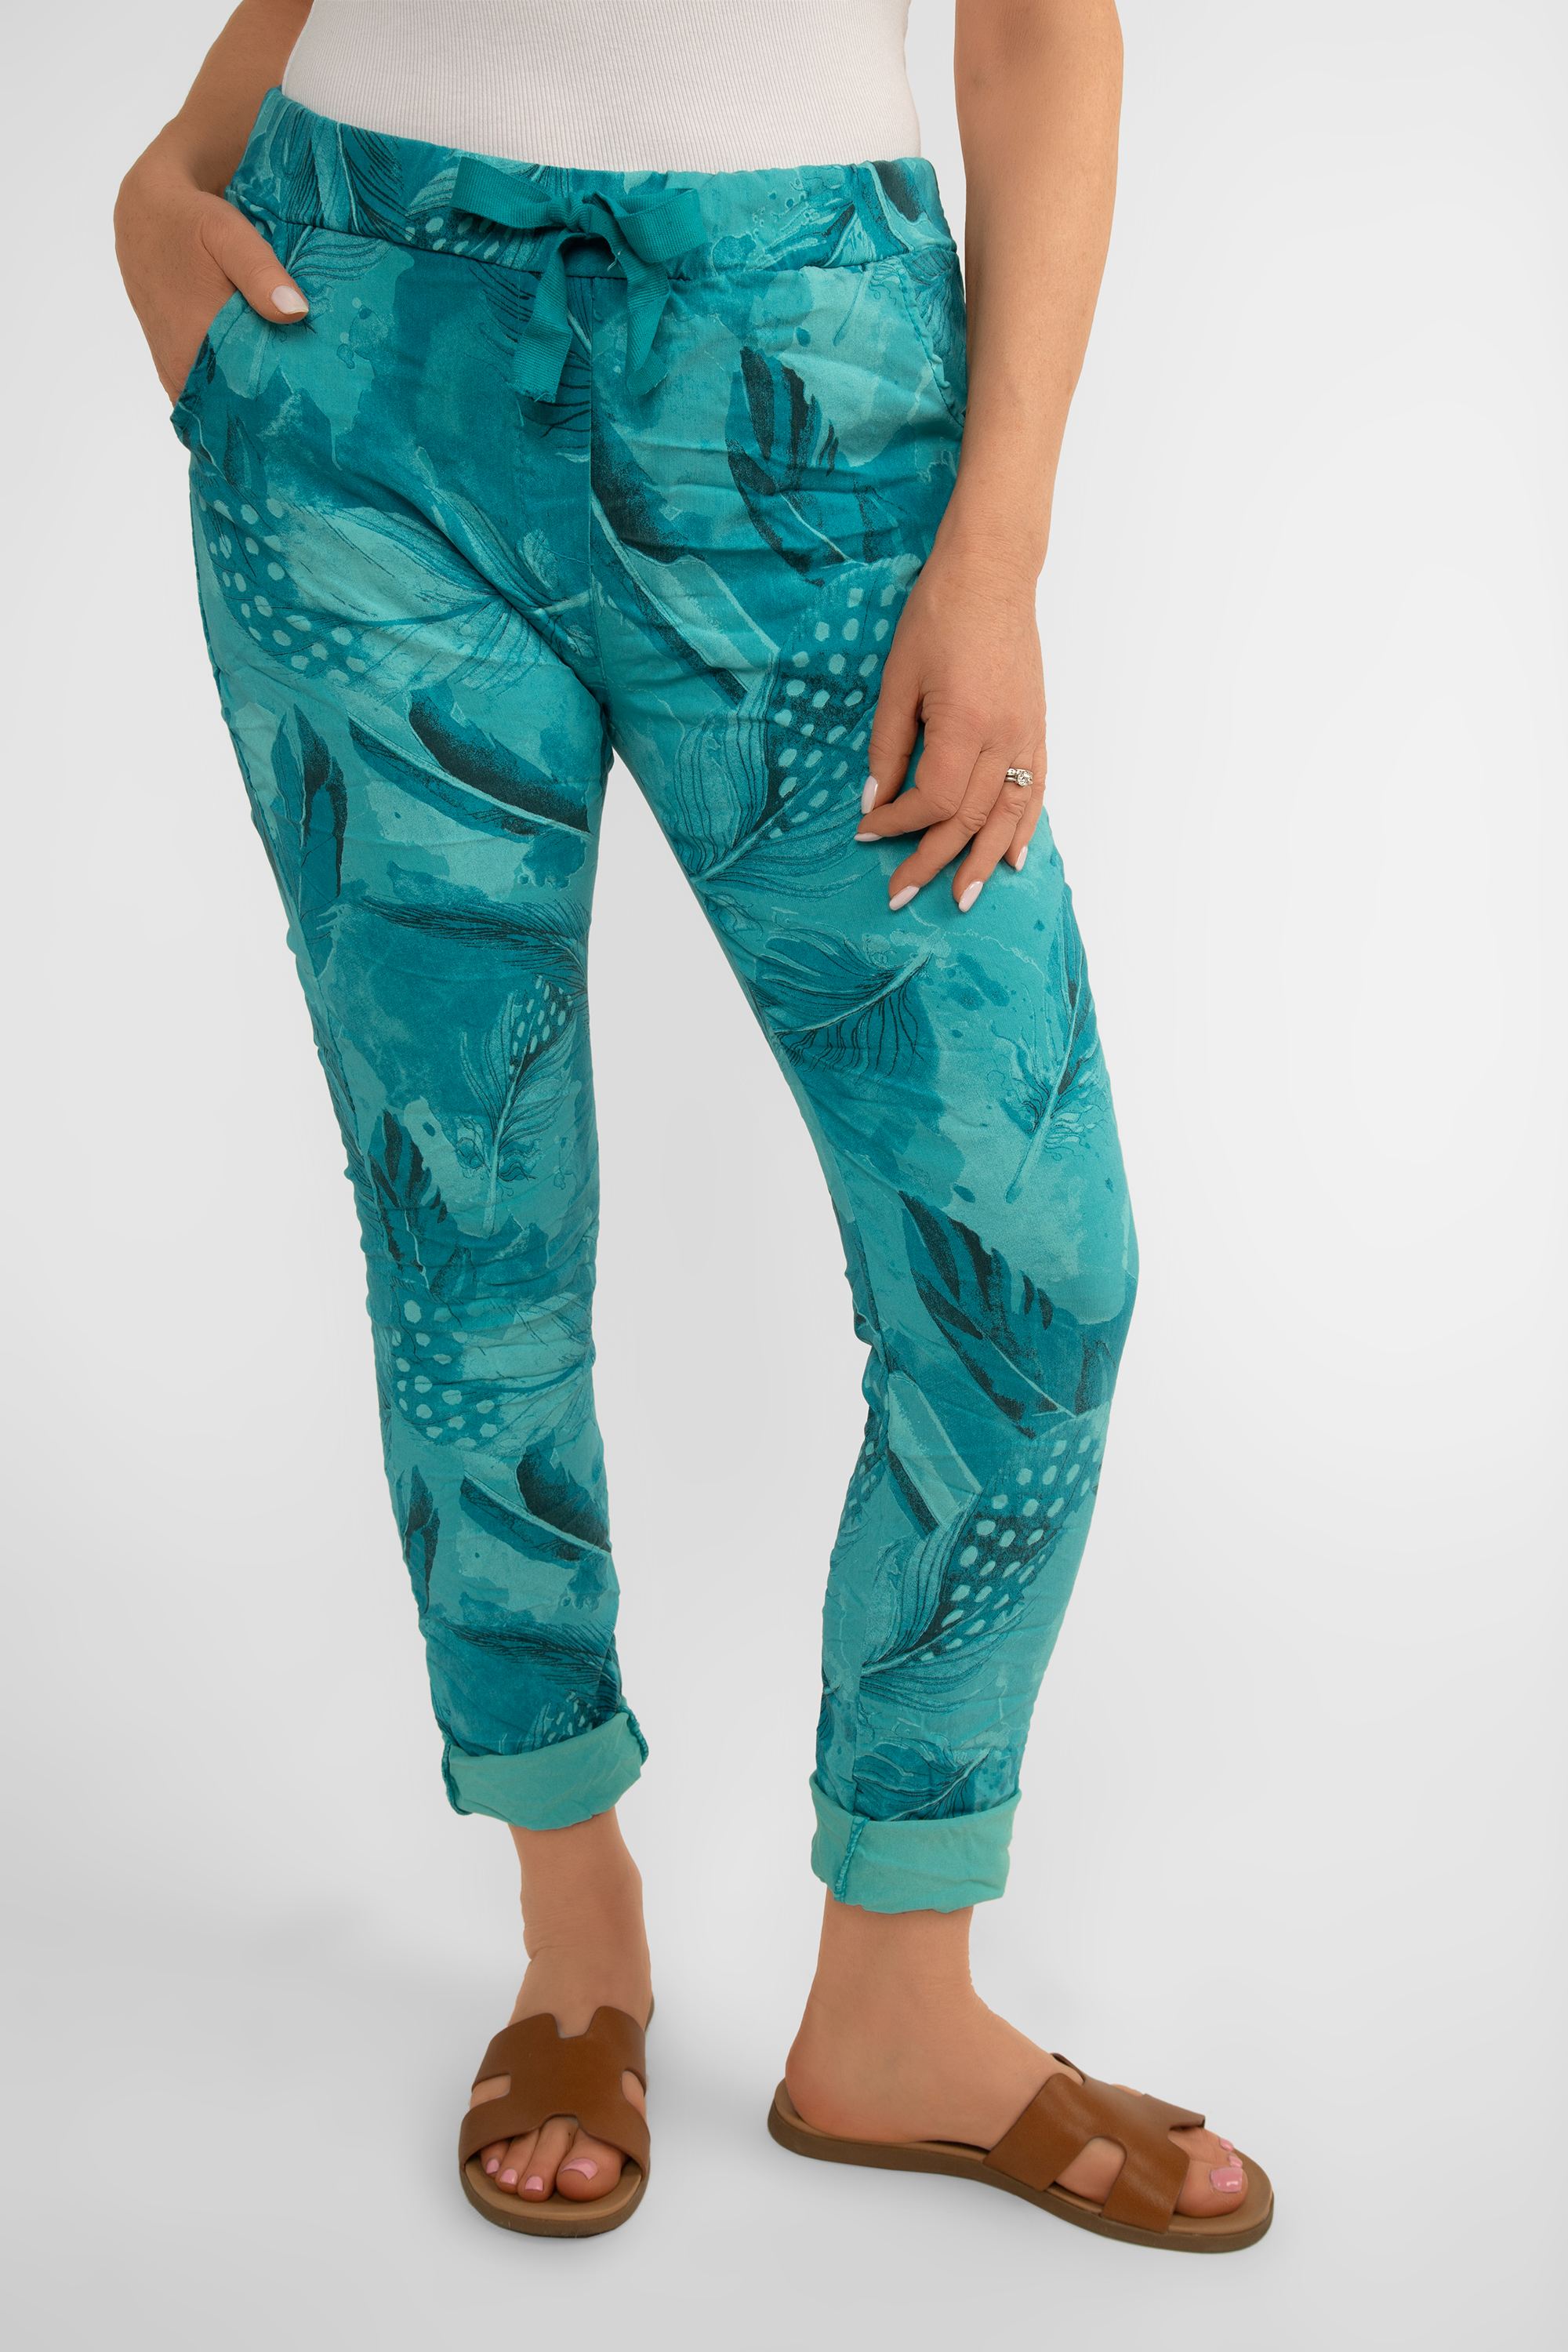 Front view of Bella Amore (21144) Women's Slim Fit Cropped Crinkle Pants with Side Pockets, Pull-on waist in Teal Feather Print